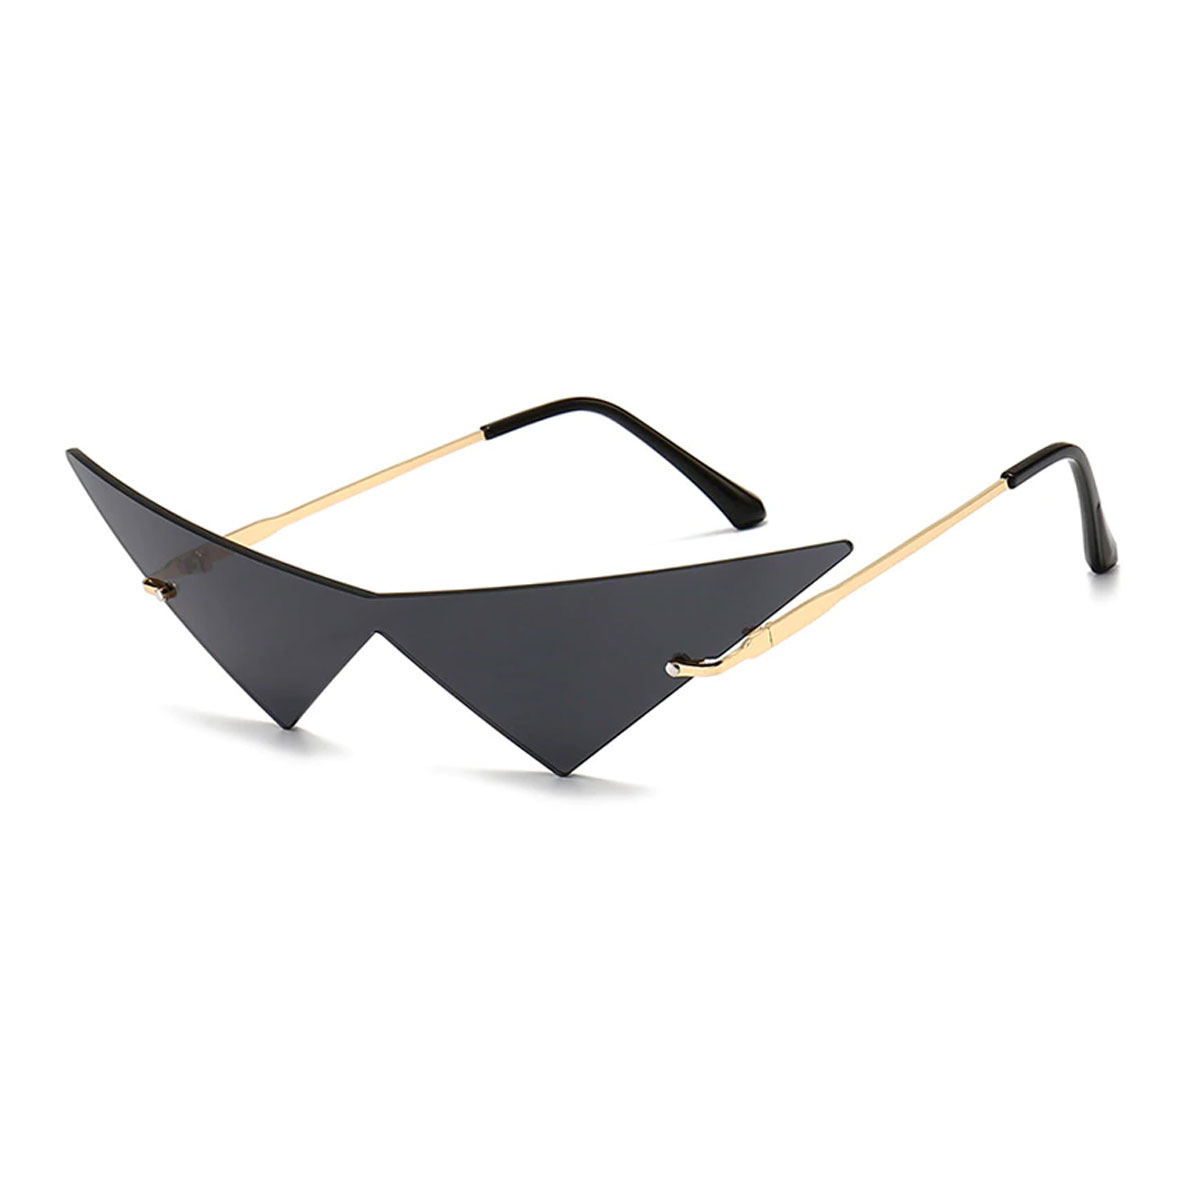 Designer Triangle Thin Sunglasses Unisex Retro Cat Eye Style With Metal  Frame For Outdoor Wear From Fashionstore777, $22.02 | DHgate.Com